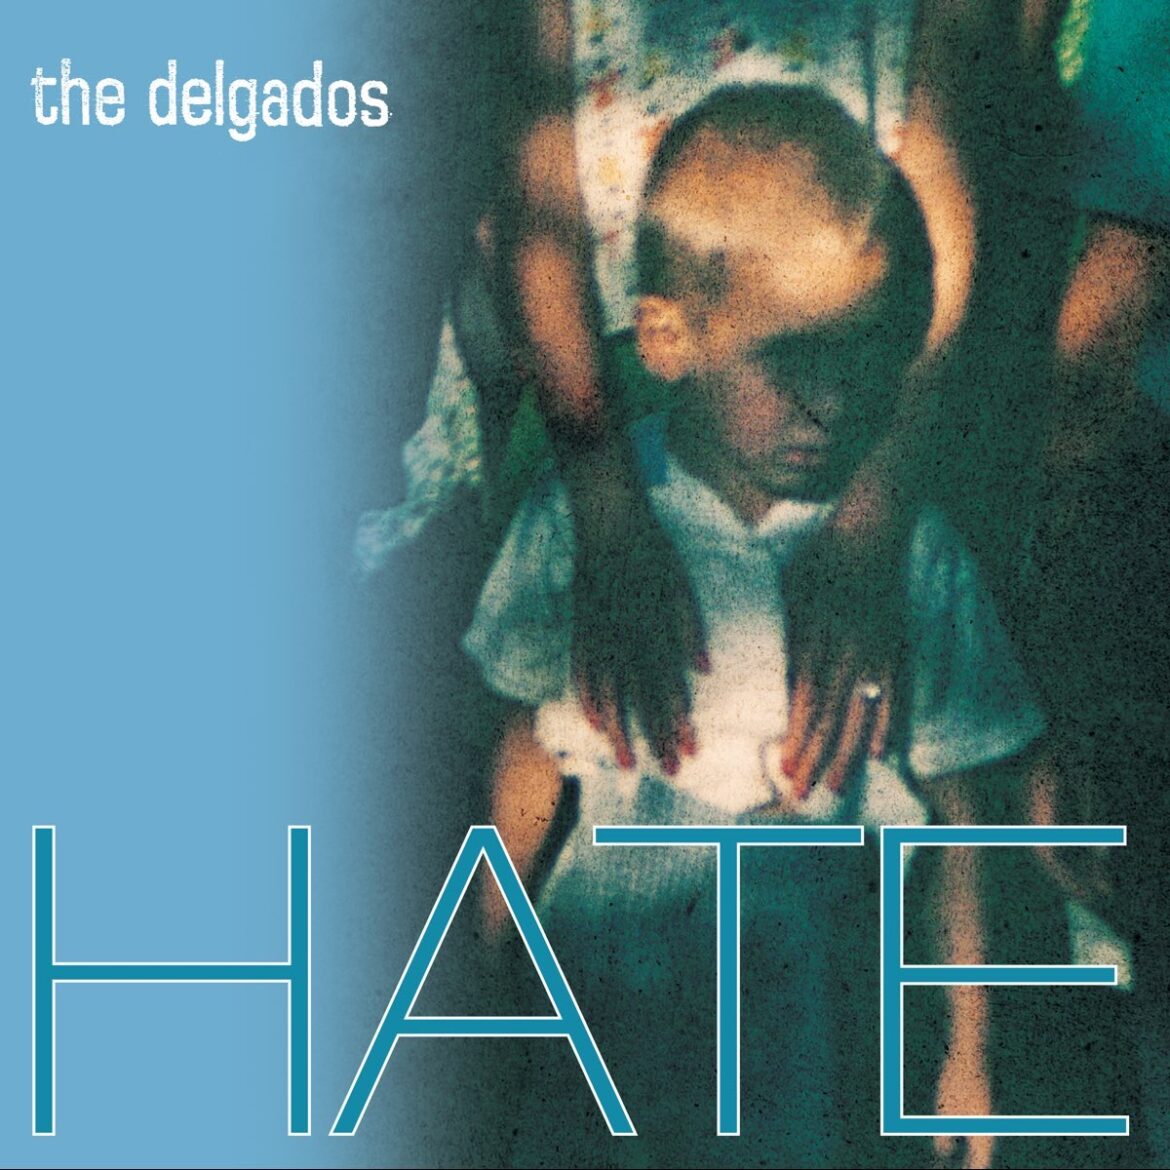 the-delgados-released-“hate”-20-years-ago-today